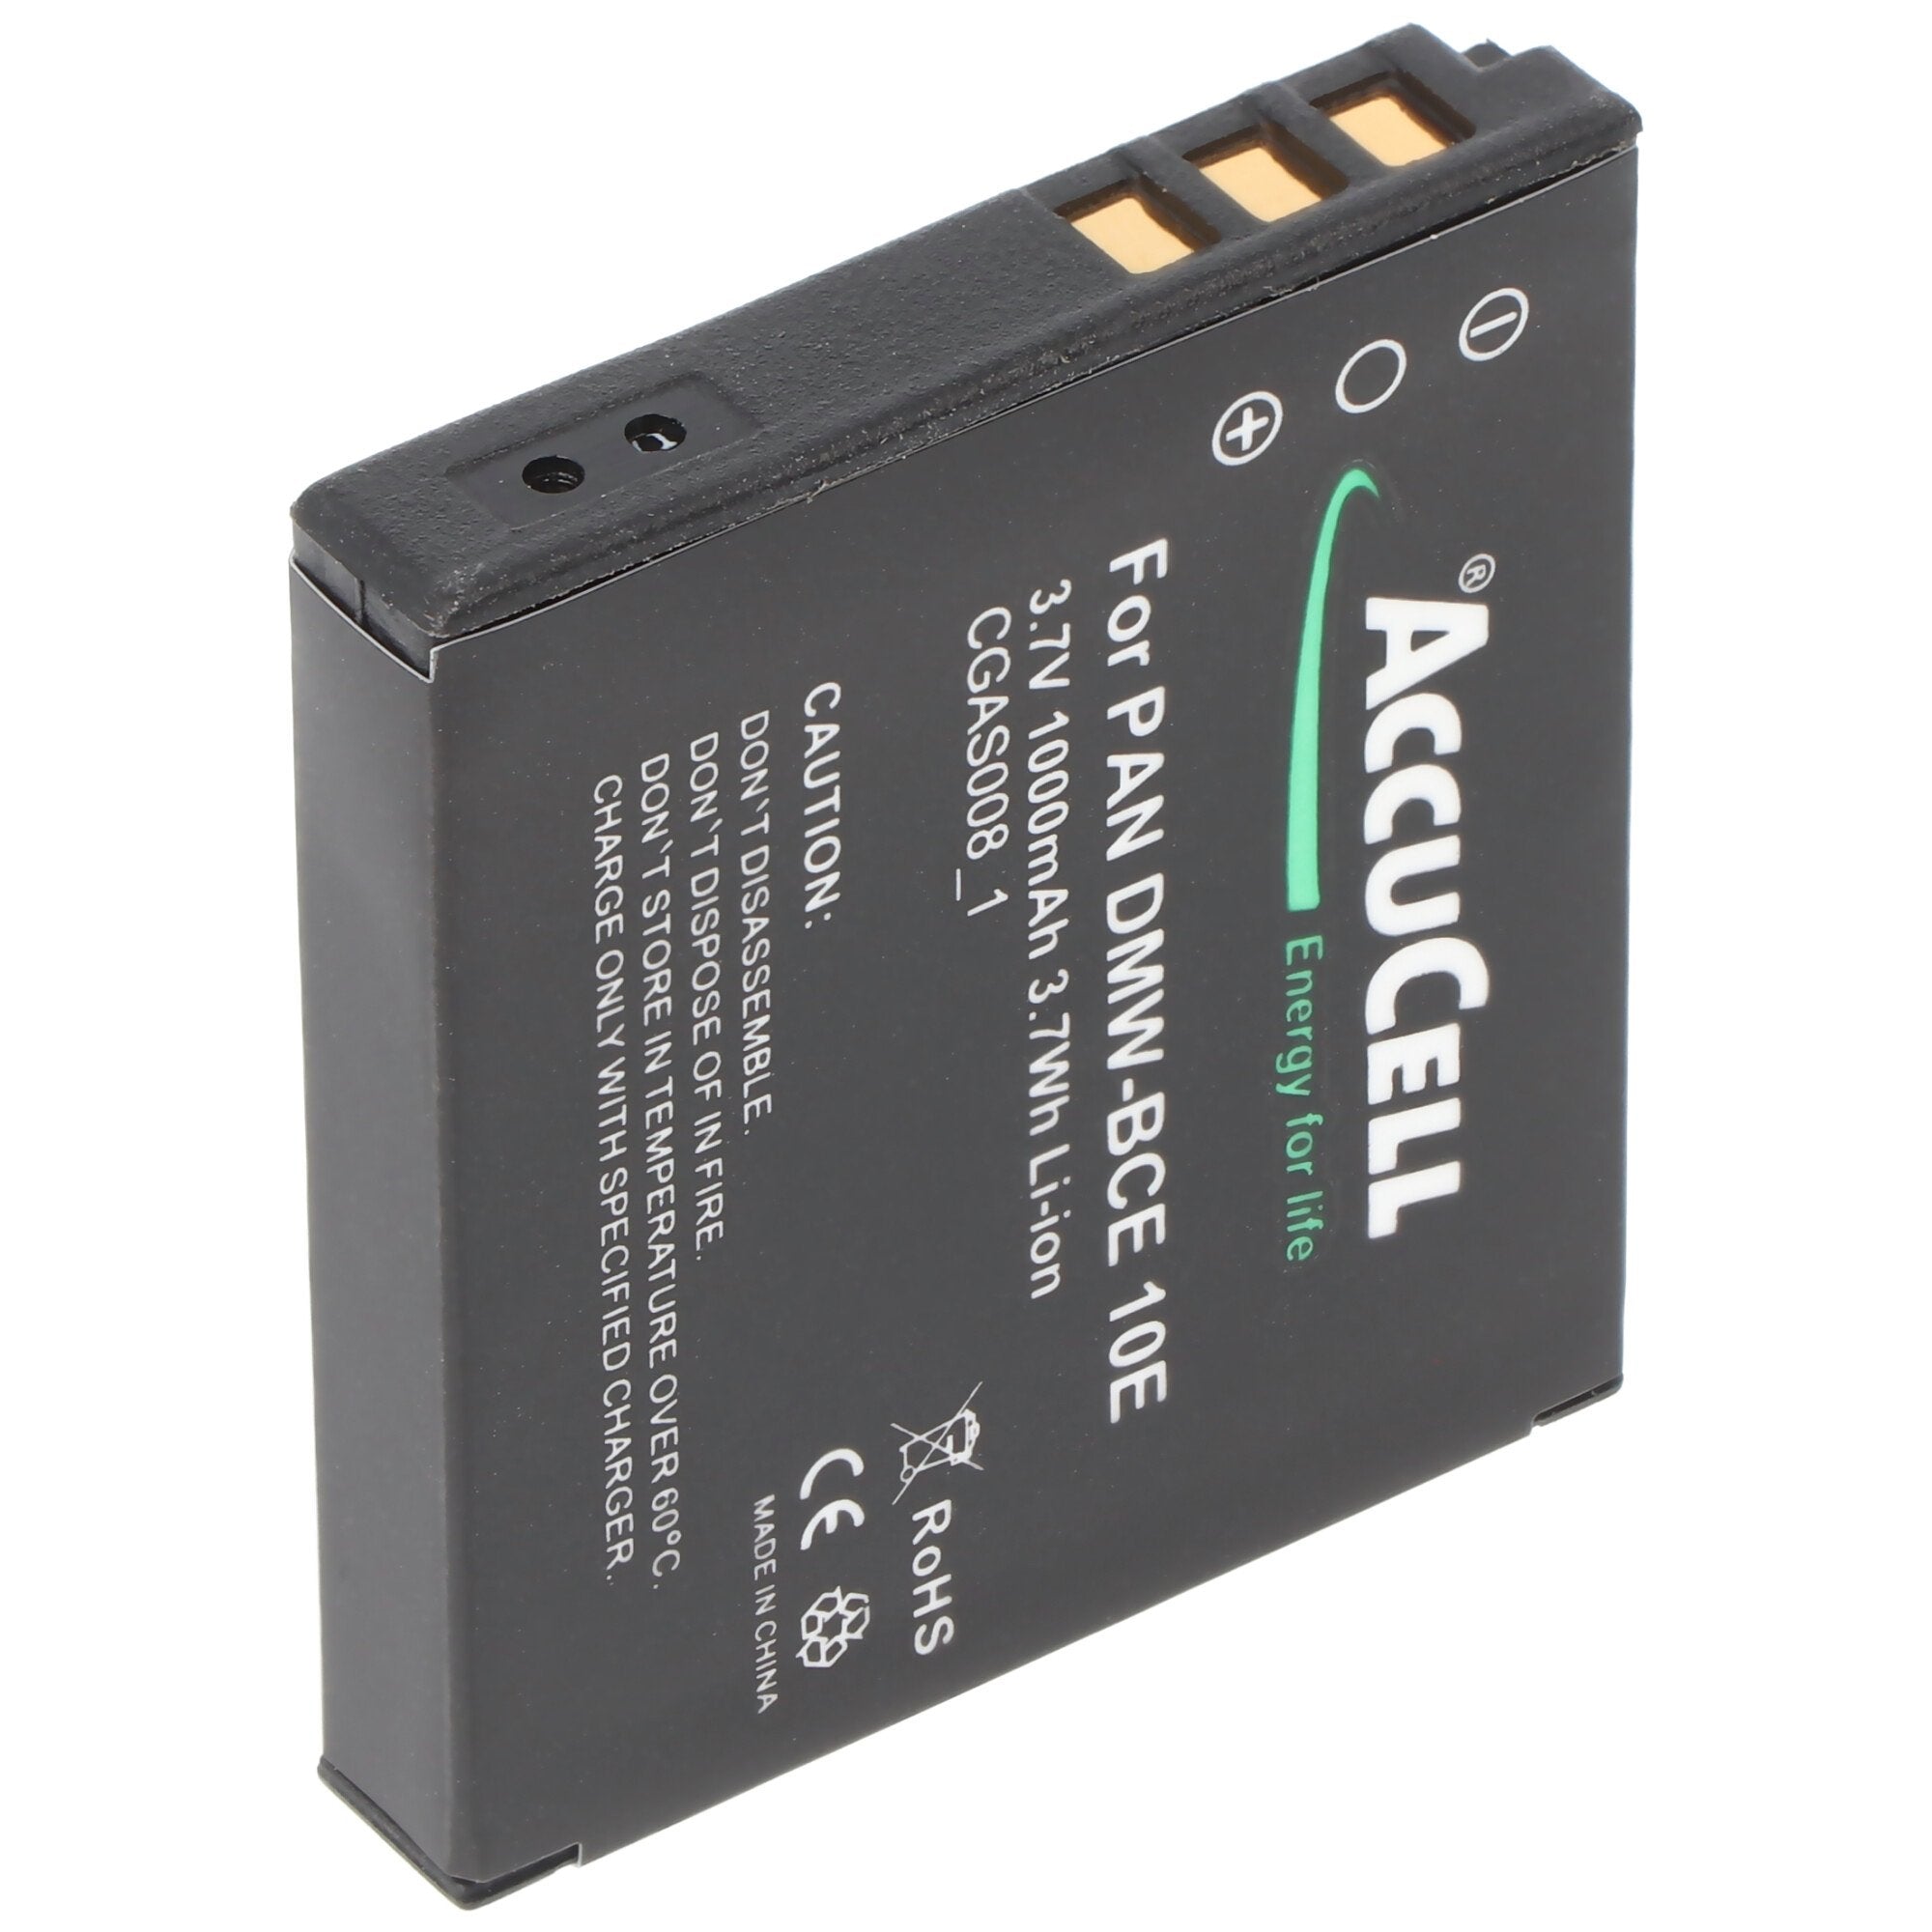 AccuCell battery suitable for Panasonic VW-VBJ10, SDR-S10, CGA-S008